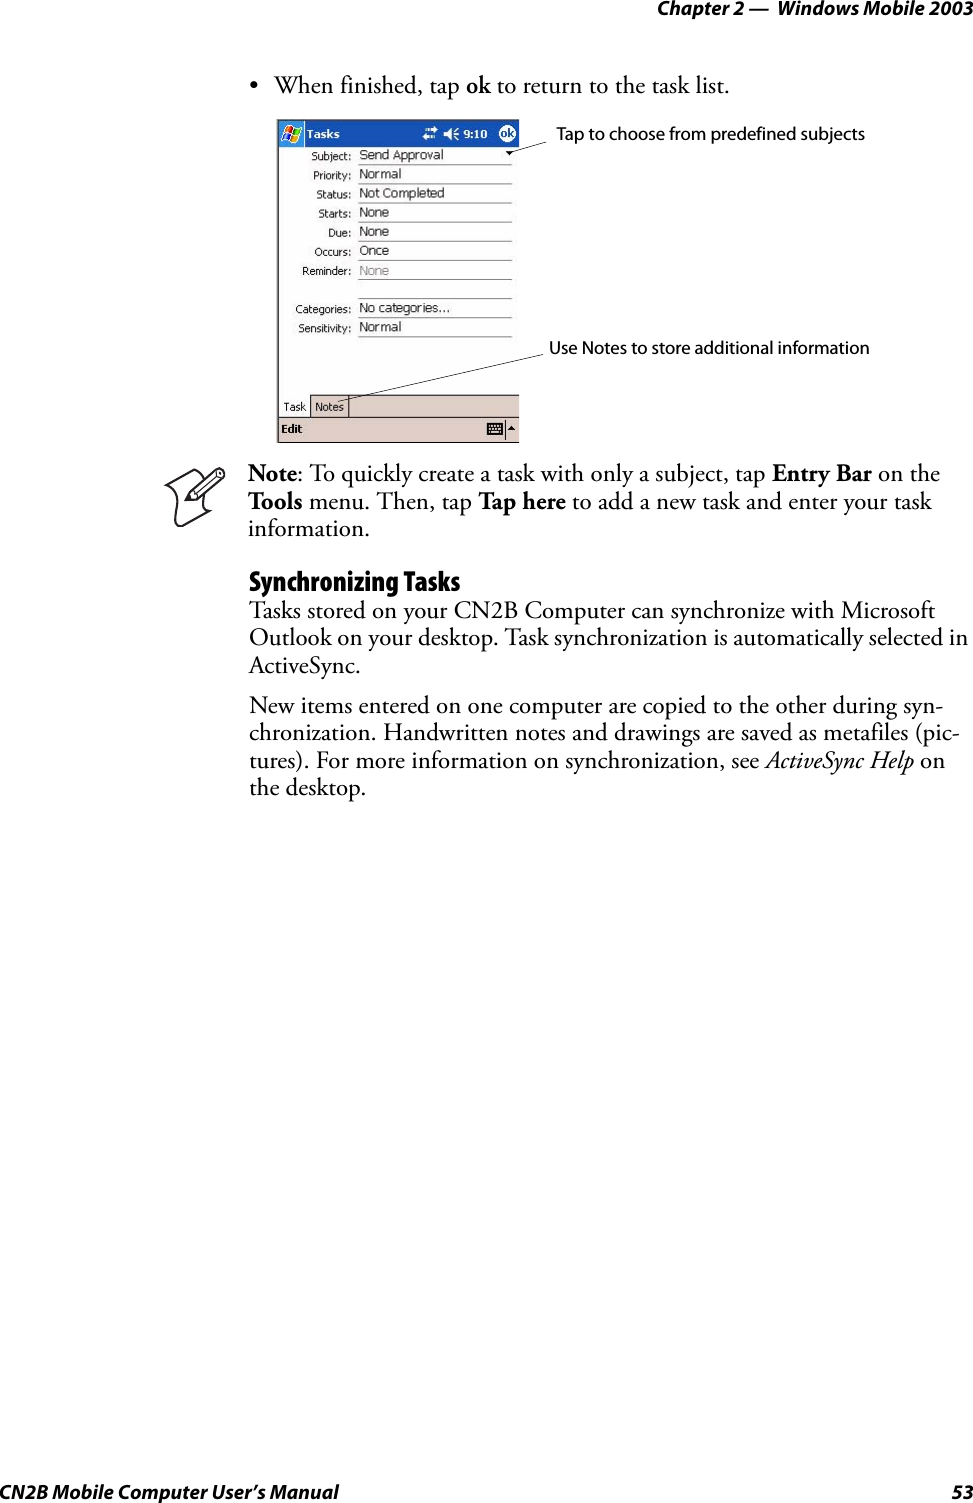 Chapter 2 —  Windows Mobile 2003CN2B Mobile Computer User’s Manual 53• When finished, tap ok to return to the task list.Synchronizing TasksTasks stored on your CN2B Computer can synchronize with Microsoft Outlook on your desktop. Task synchronization is automatically selected in ActiveSync.New items entered on one computer are copied to the other during syn-chronization. Handwritten notes and drawings are saved as metafiles (pic-tures). For more information on synchronization, see ActiveSync Help on the desktop.Note: To quickly create a task with only a subject, tap Entry Bar on the Tools menu. Then, tap Ta p h ere to add a new task and enter your task information.Tap to choose from predefined subjectsUse Notes to store additional information